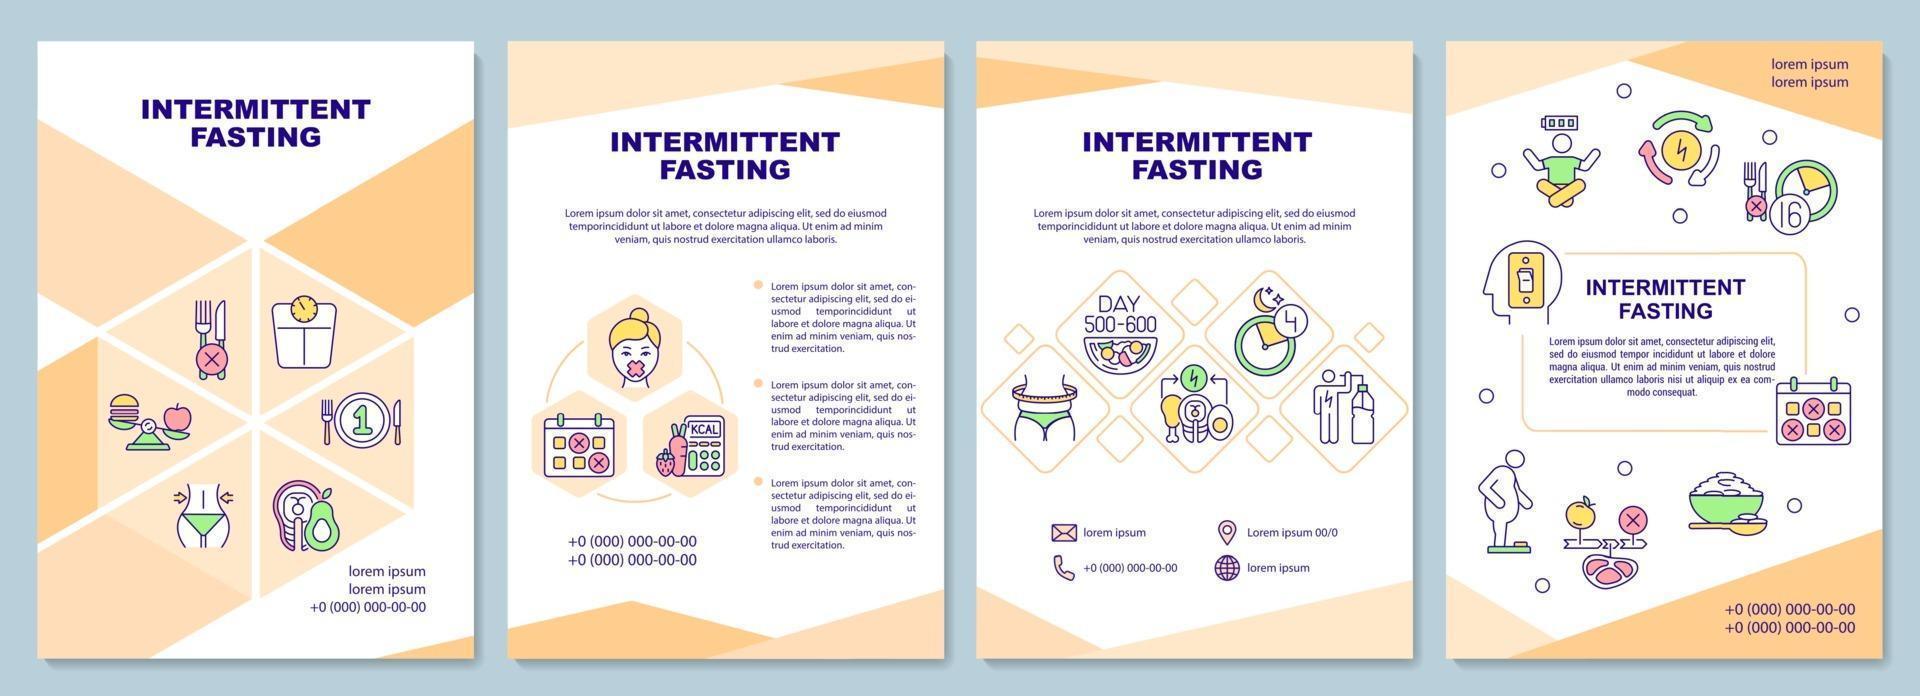 Intermittent fasting brochure template vector